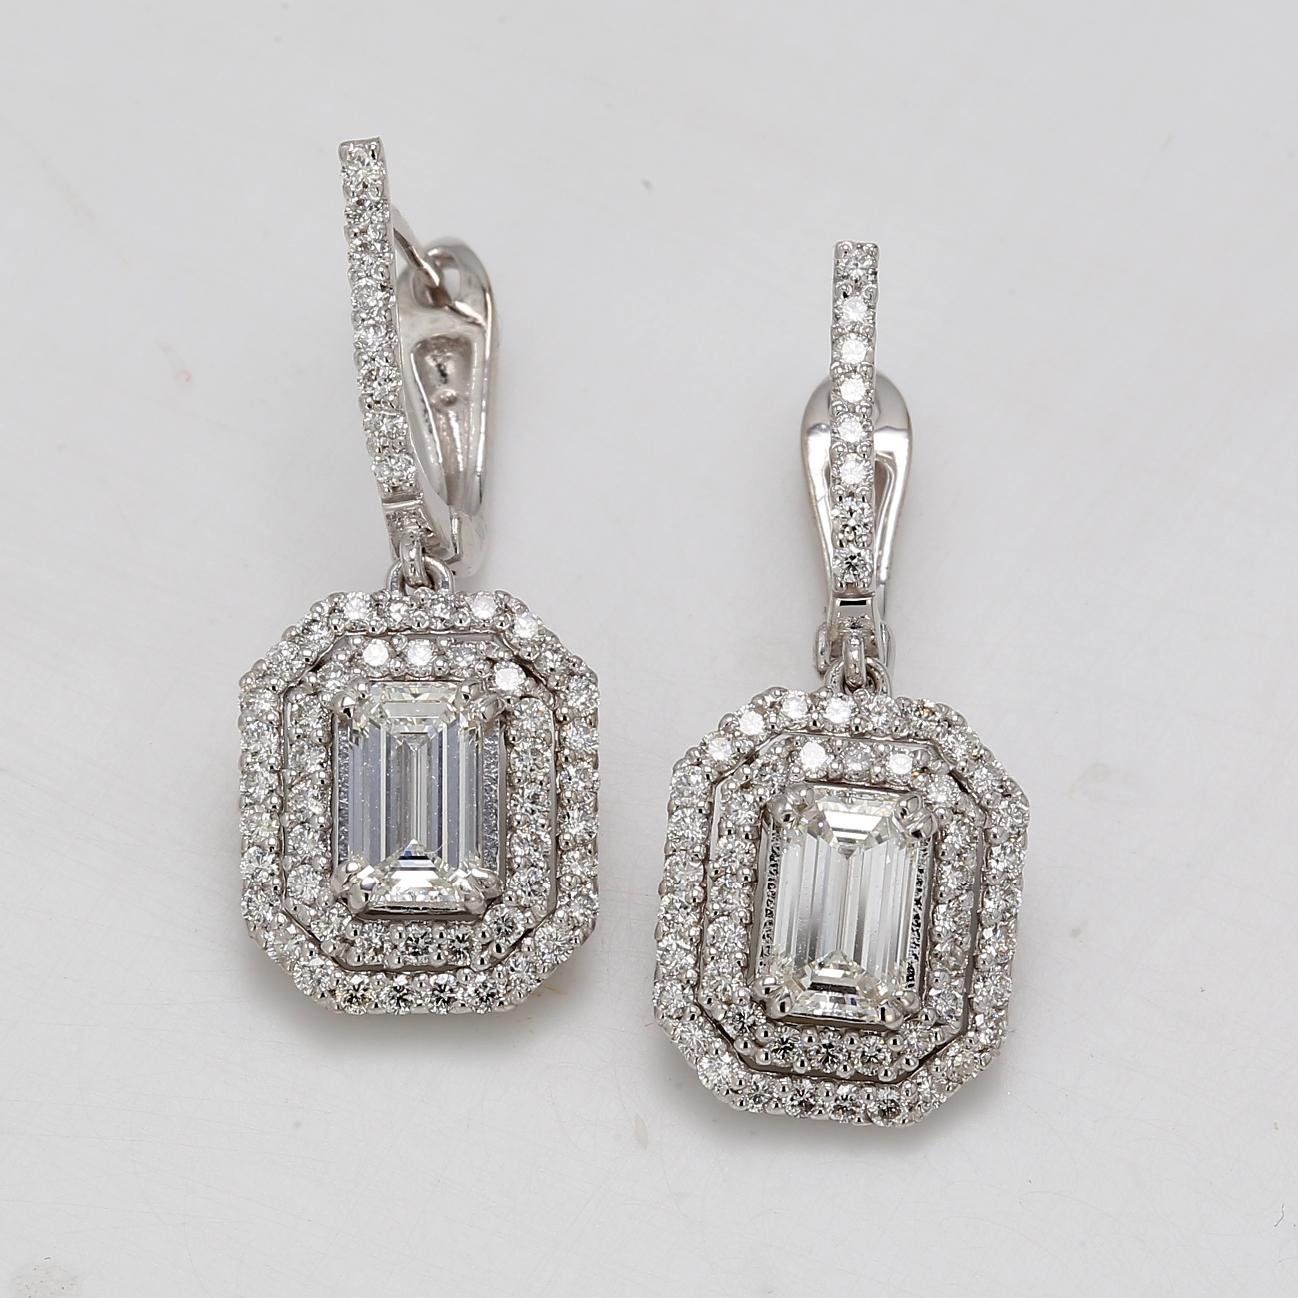 Halo dangling earrings in 14K WG with prong set rounds around prong set GIA certified J/IF and J/VS2 emerald cut diamond center stones.  D2.99ct.t.w.  (Center - 1.07 J/IF and 1.02 J/VS2)